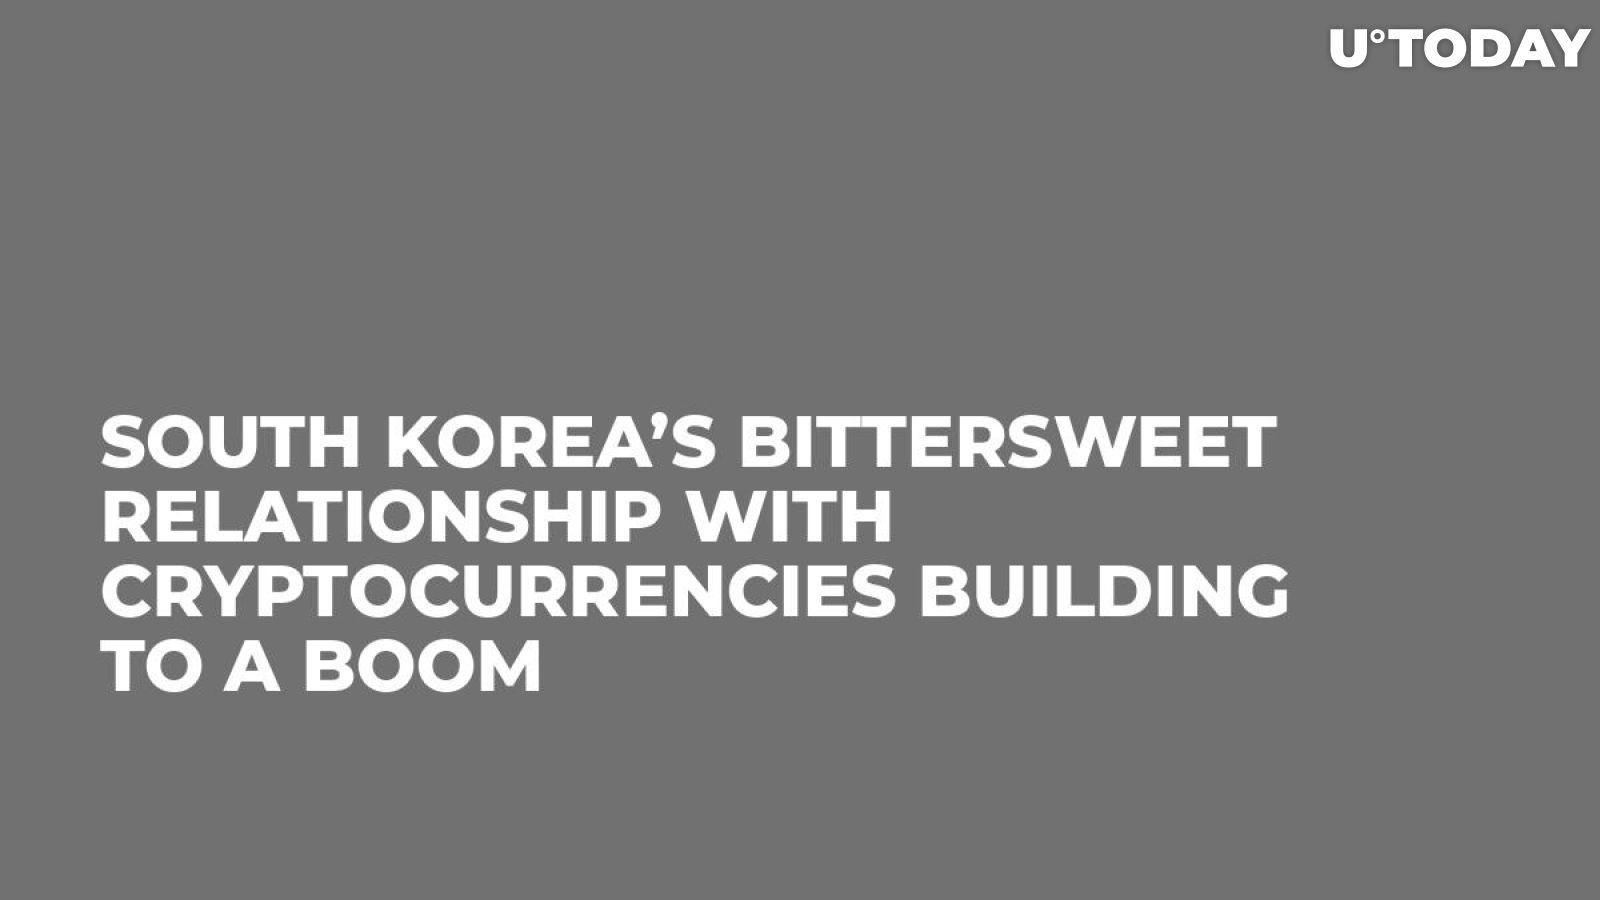 South Korea’s Bittersweet Relationship with Cryptocurrencies Building to a Boom